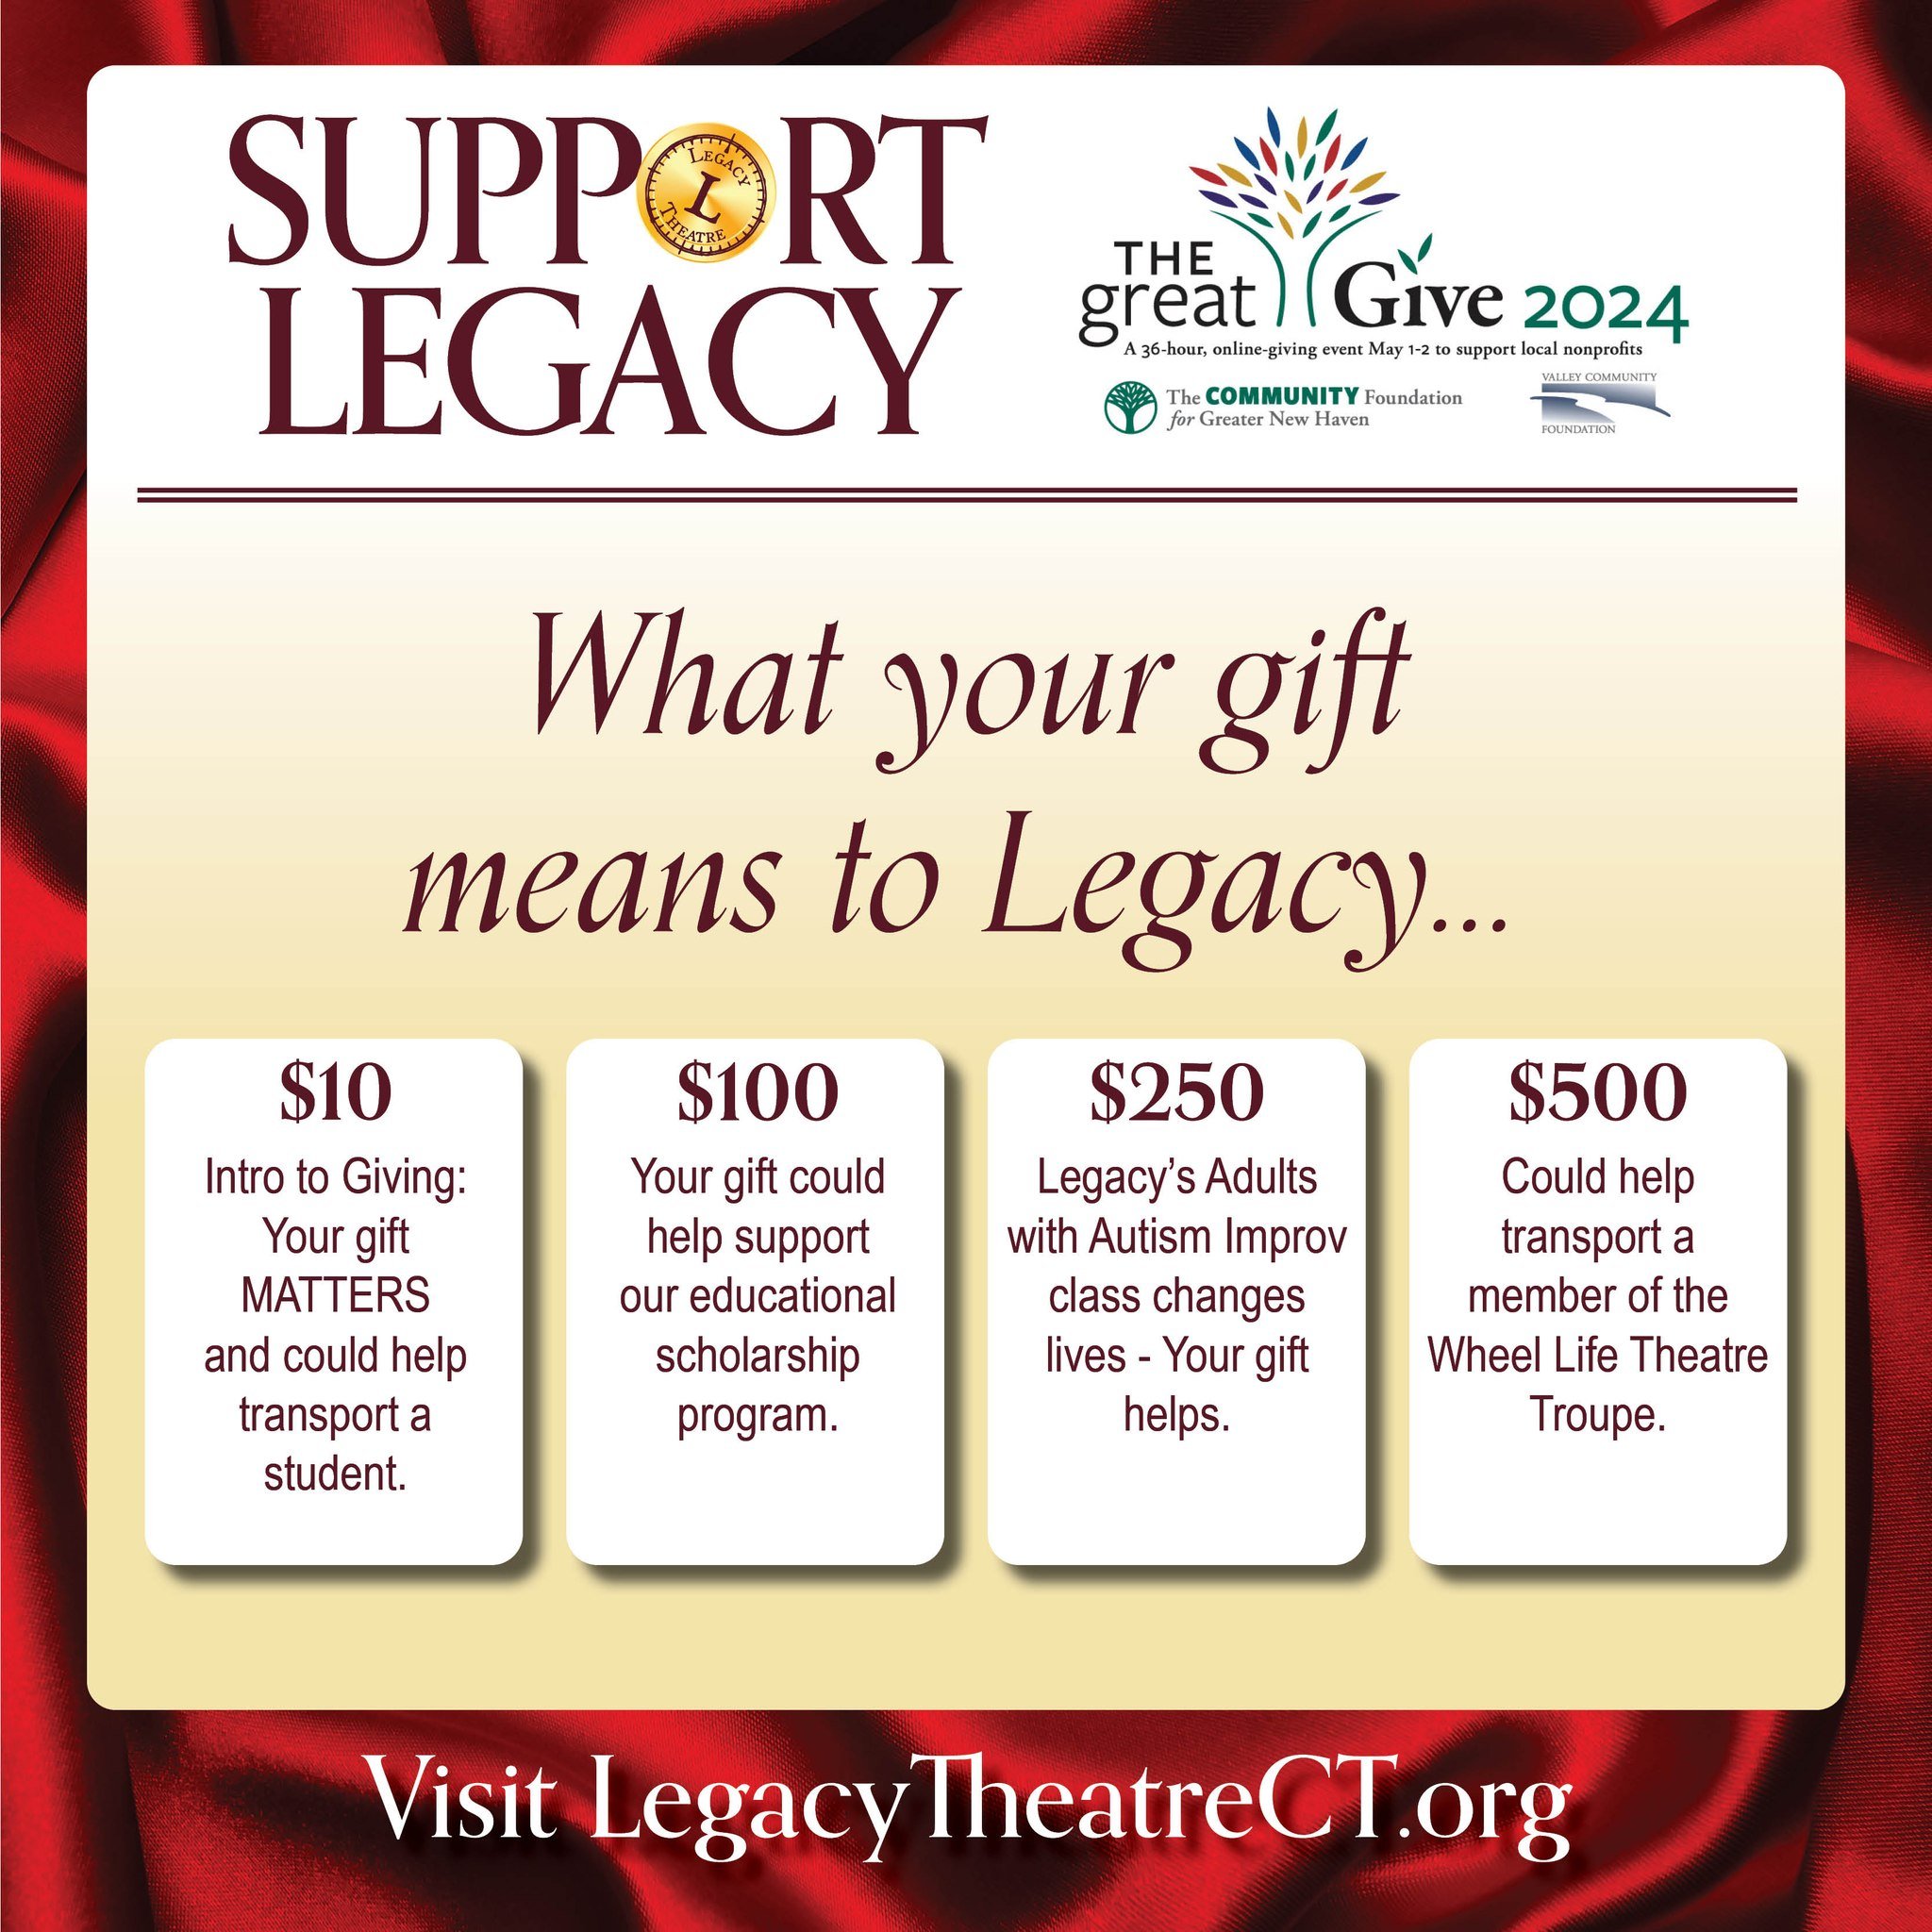 Your gift means so much to Legacy! The Great Give continues until 8pm tonight! 

https://www.legacytheatrect.org/greatgive 

#legacytheatrect #thegreatgive #givelocal #branfordct #stonycreekct #newhavenct #greatgive2024 #supportlivetheatre